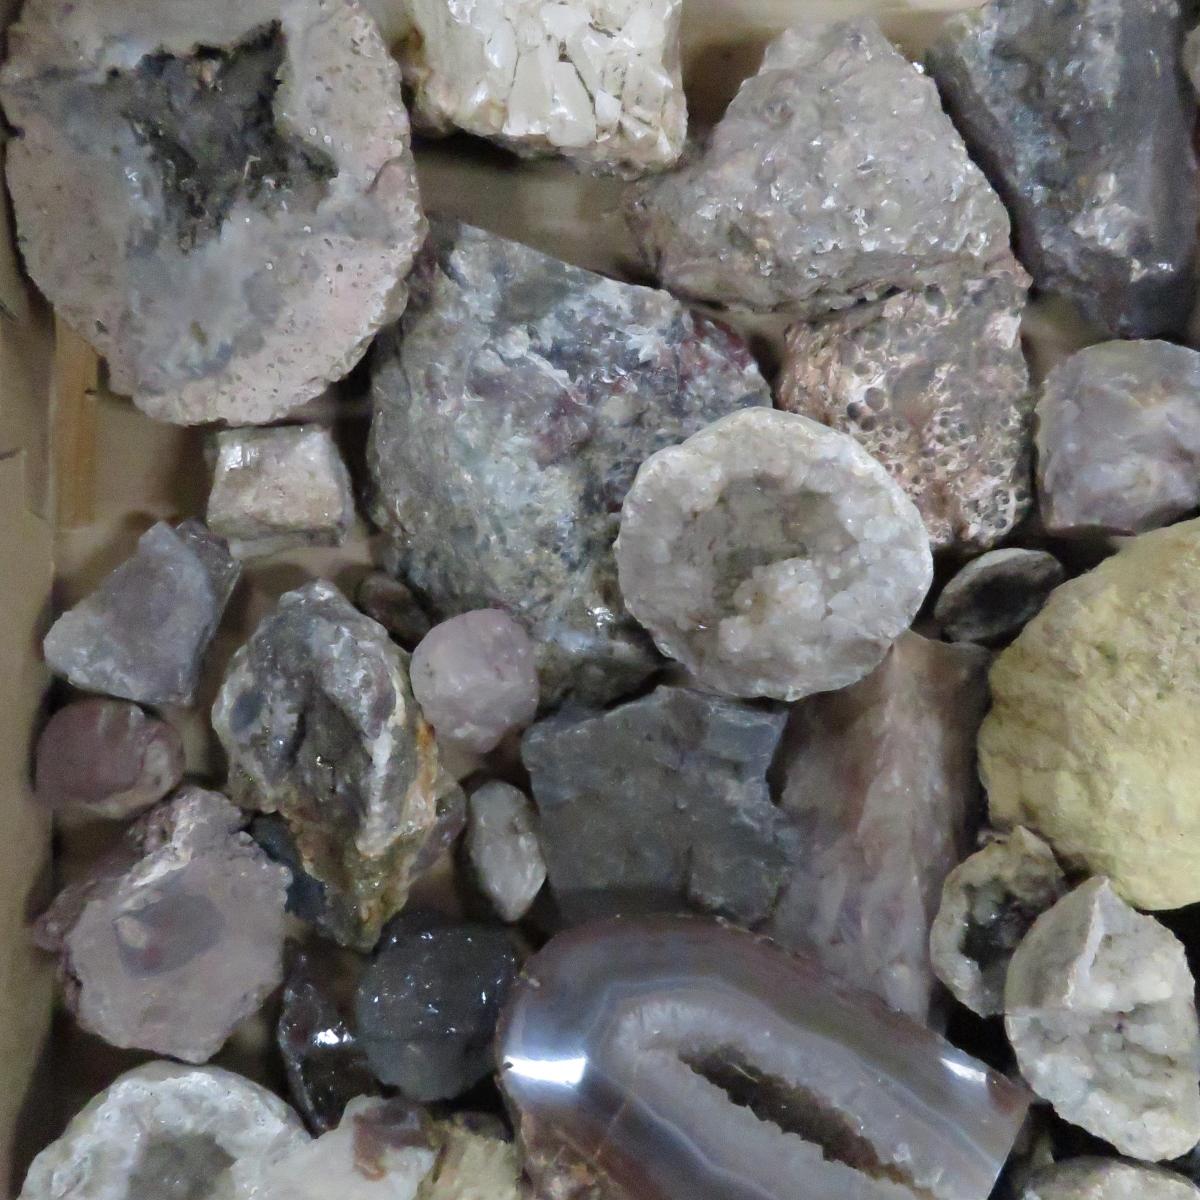 25 pounds geodes, crystals, rocks and minerals